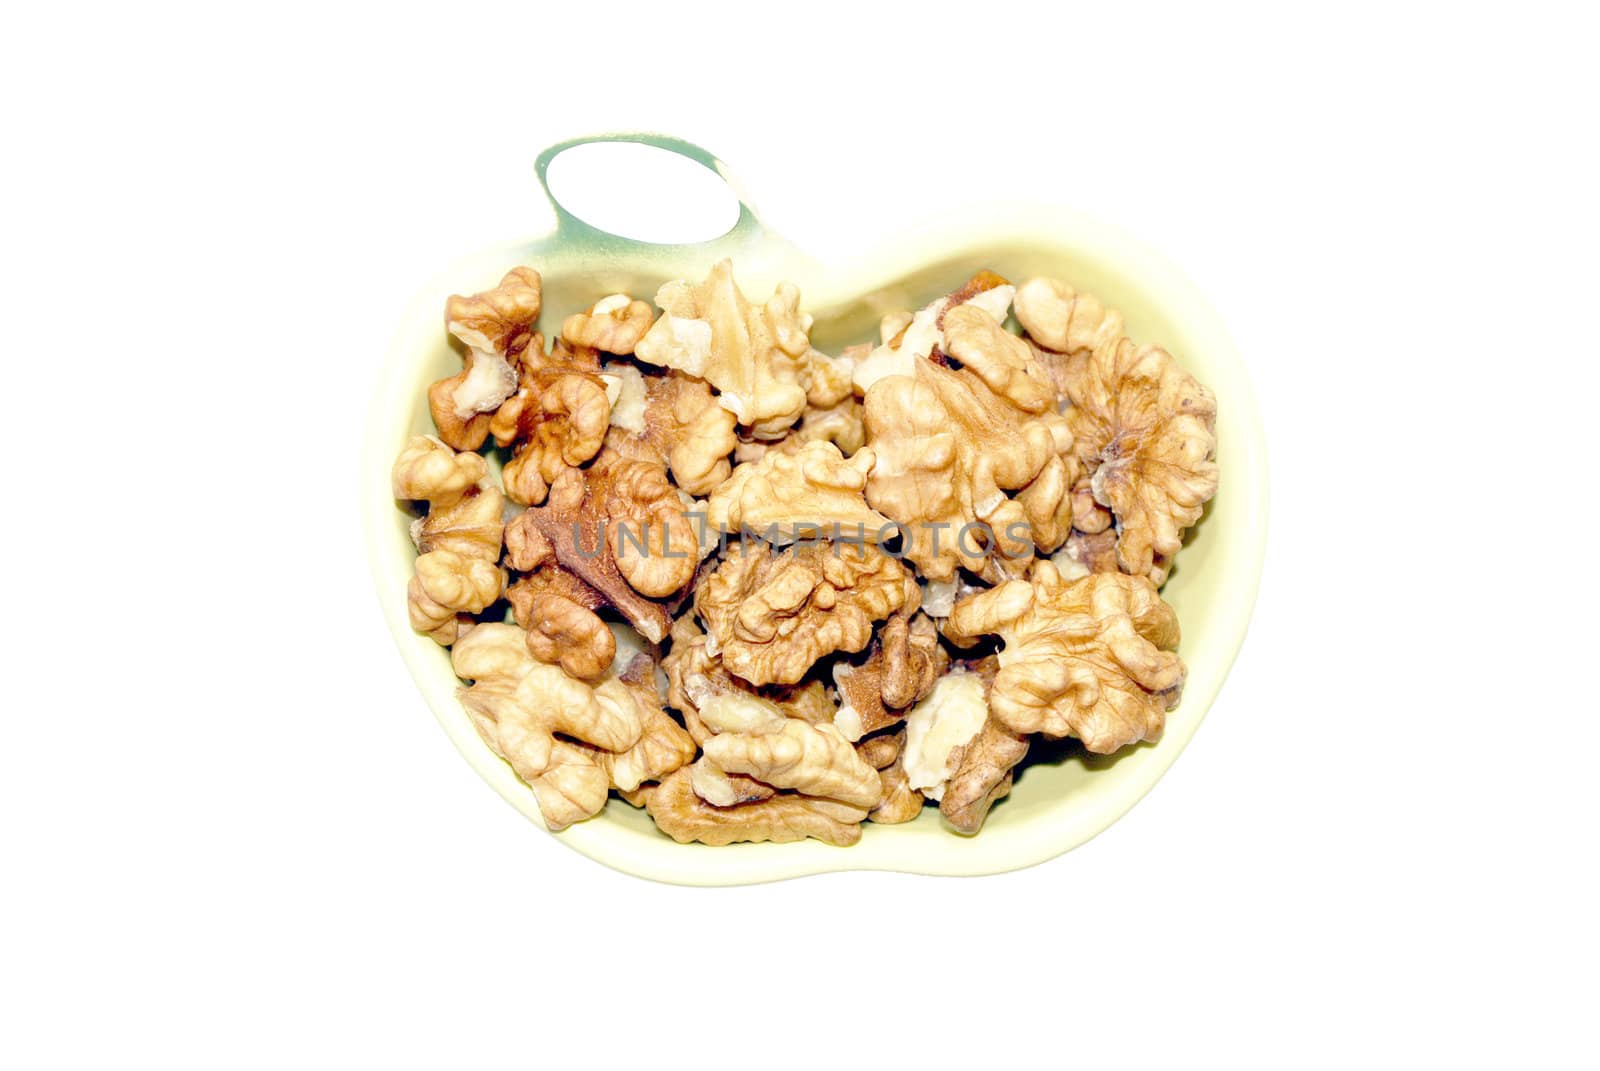 walnuts  in a cup                